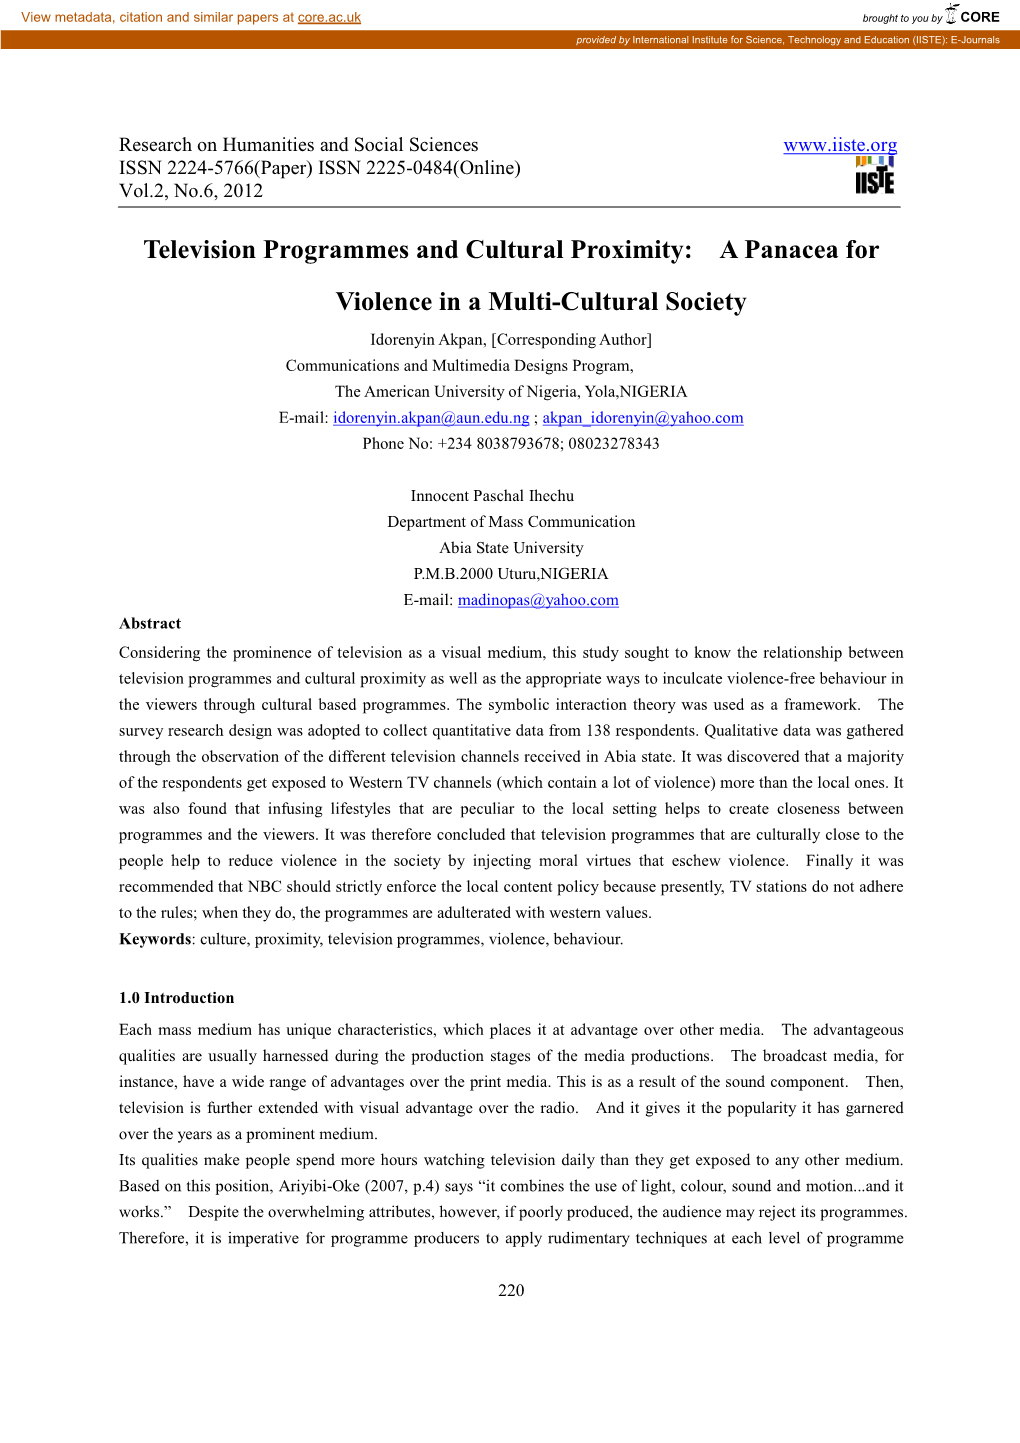 Television Programmes and Cultural Proximity